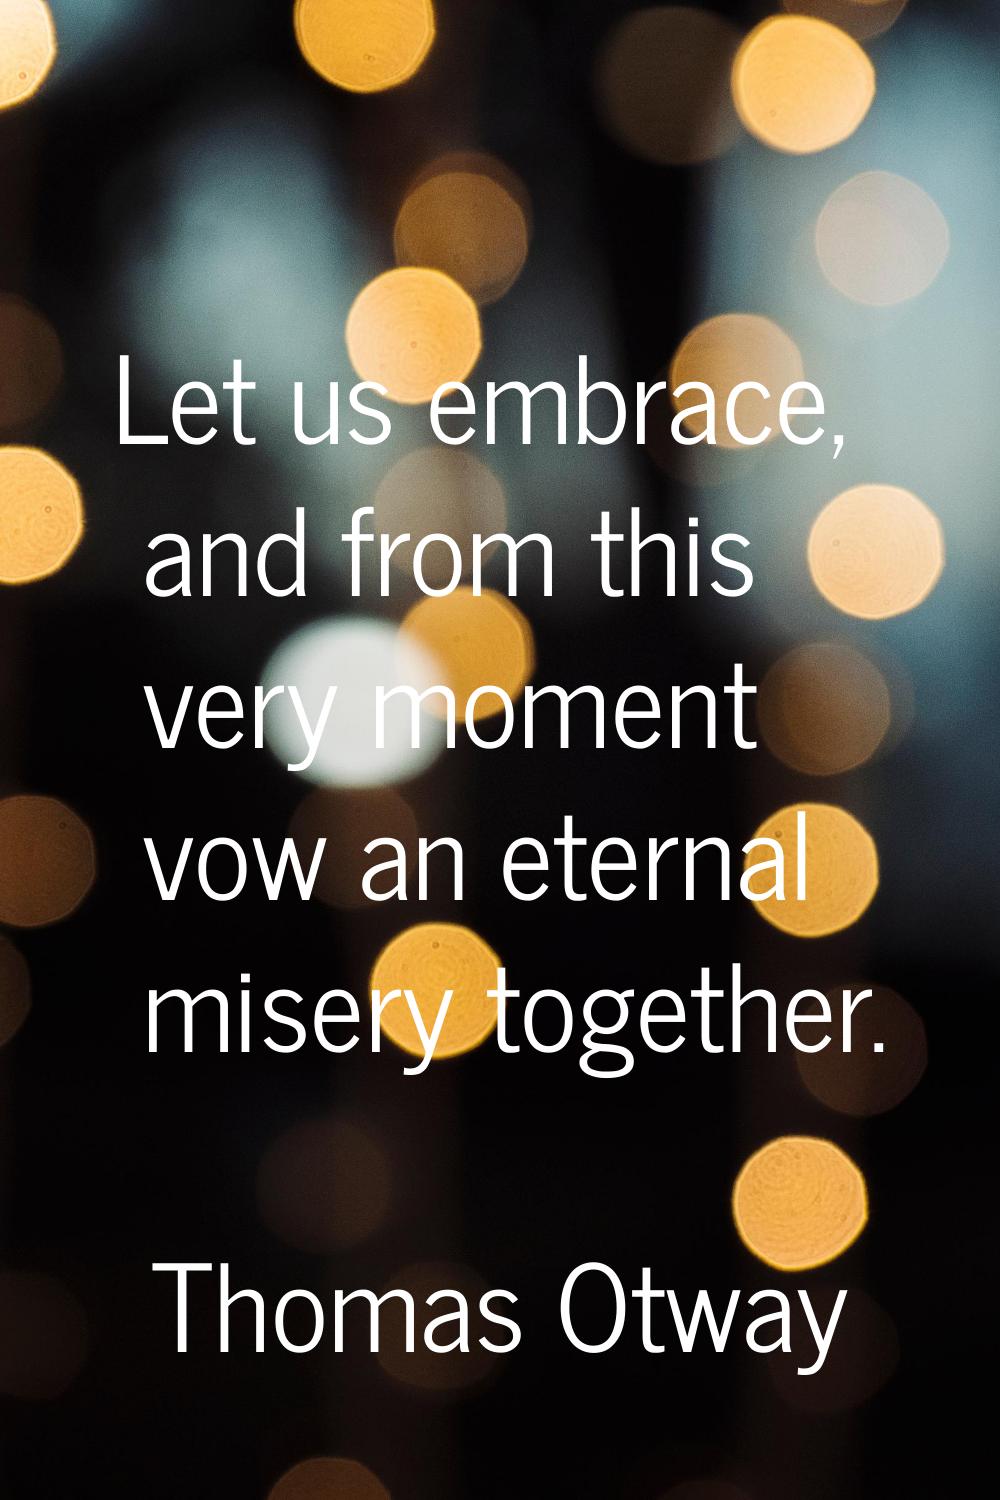 Let us embrace, and from this very moment vow an eternal misery together.